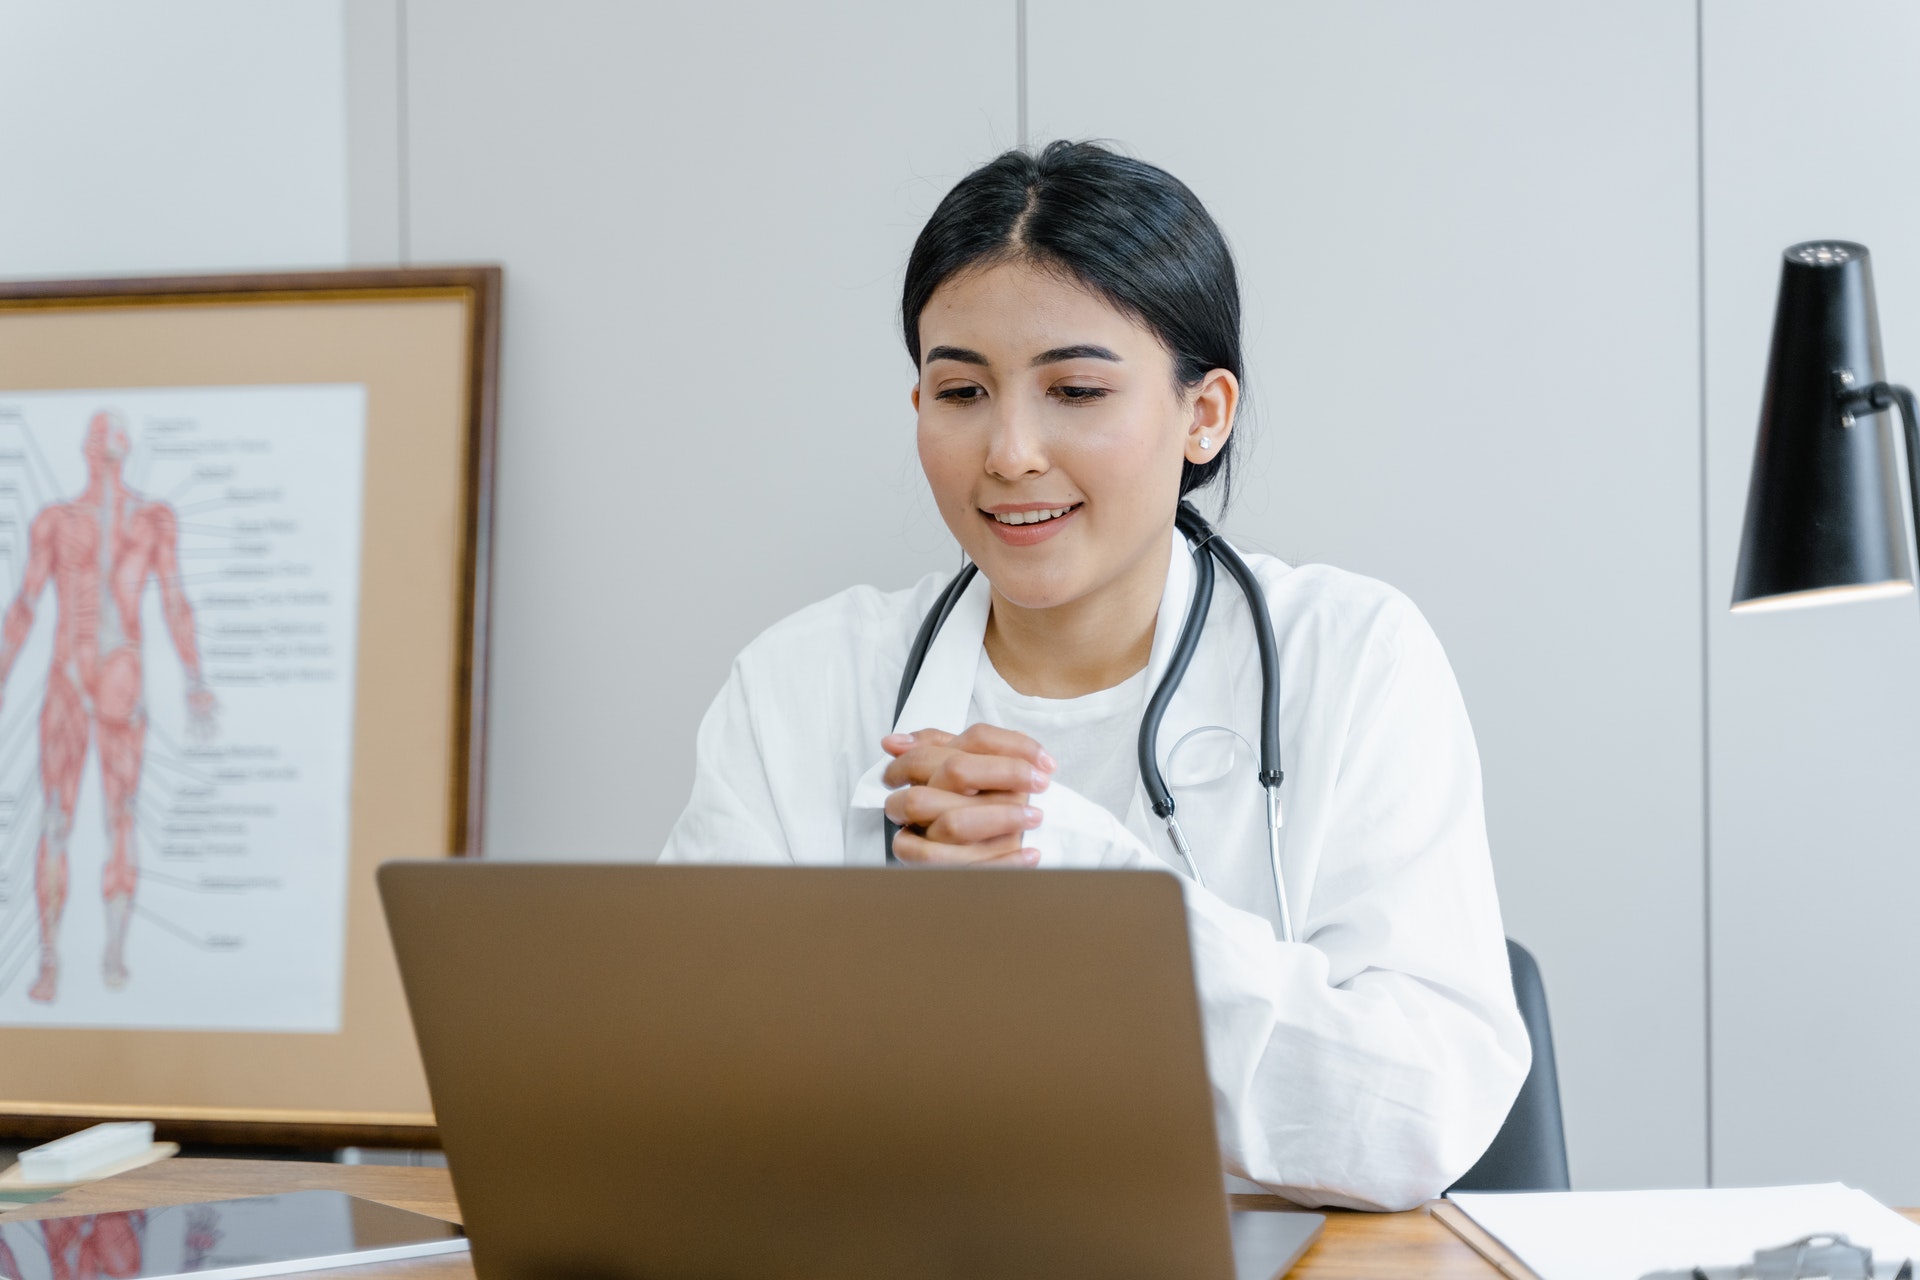 How to Convert Your Mental Health Practice to Telehealth in 5 Days or Less